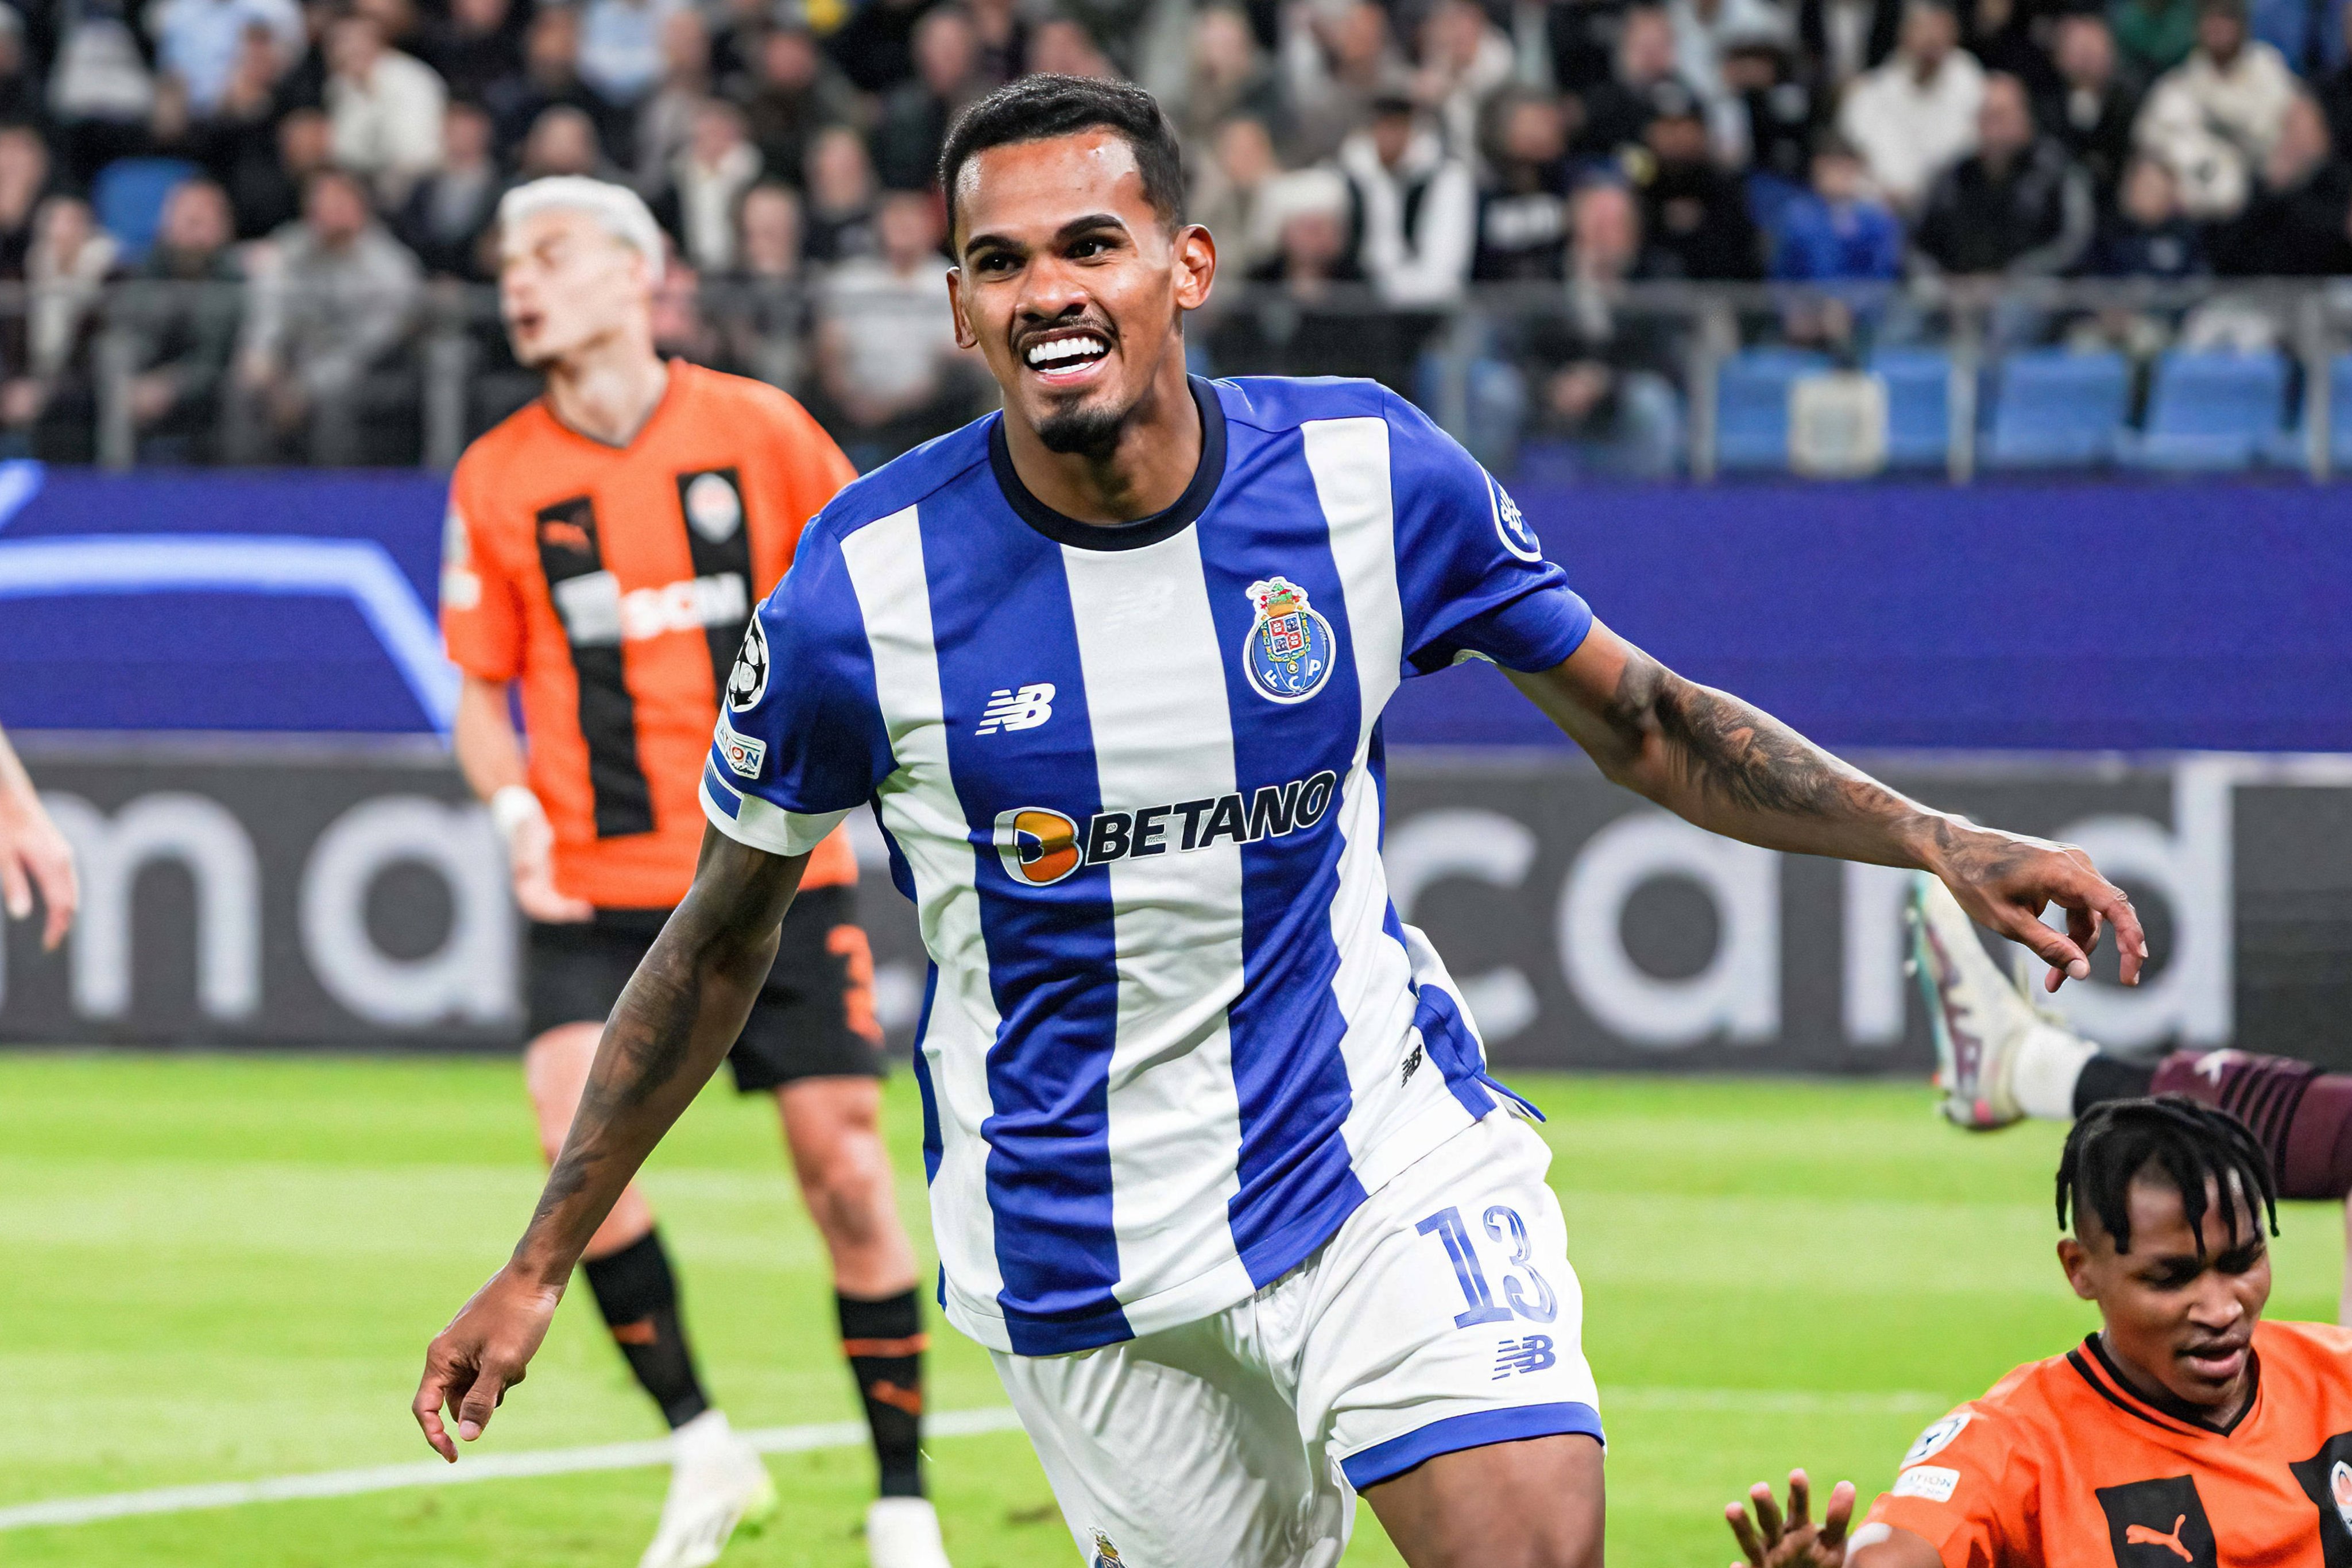 X-এ Sofascore: " | FOCUS Wenderson Galeno led Porto to a 3–1 win over  Shakhtar Donetsk in Hamburg this evening:  44 touches ⚽️ 2 goals  3  shots/3 on target (0.62